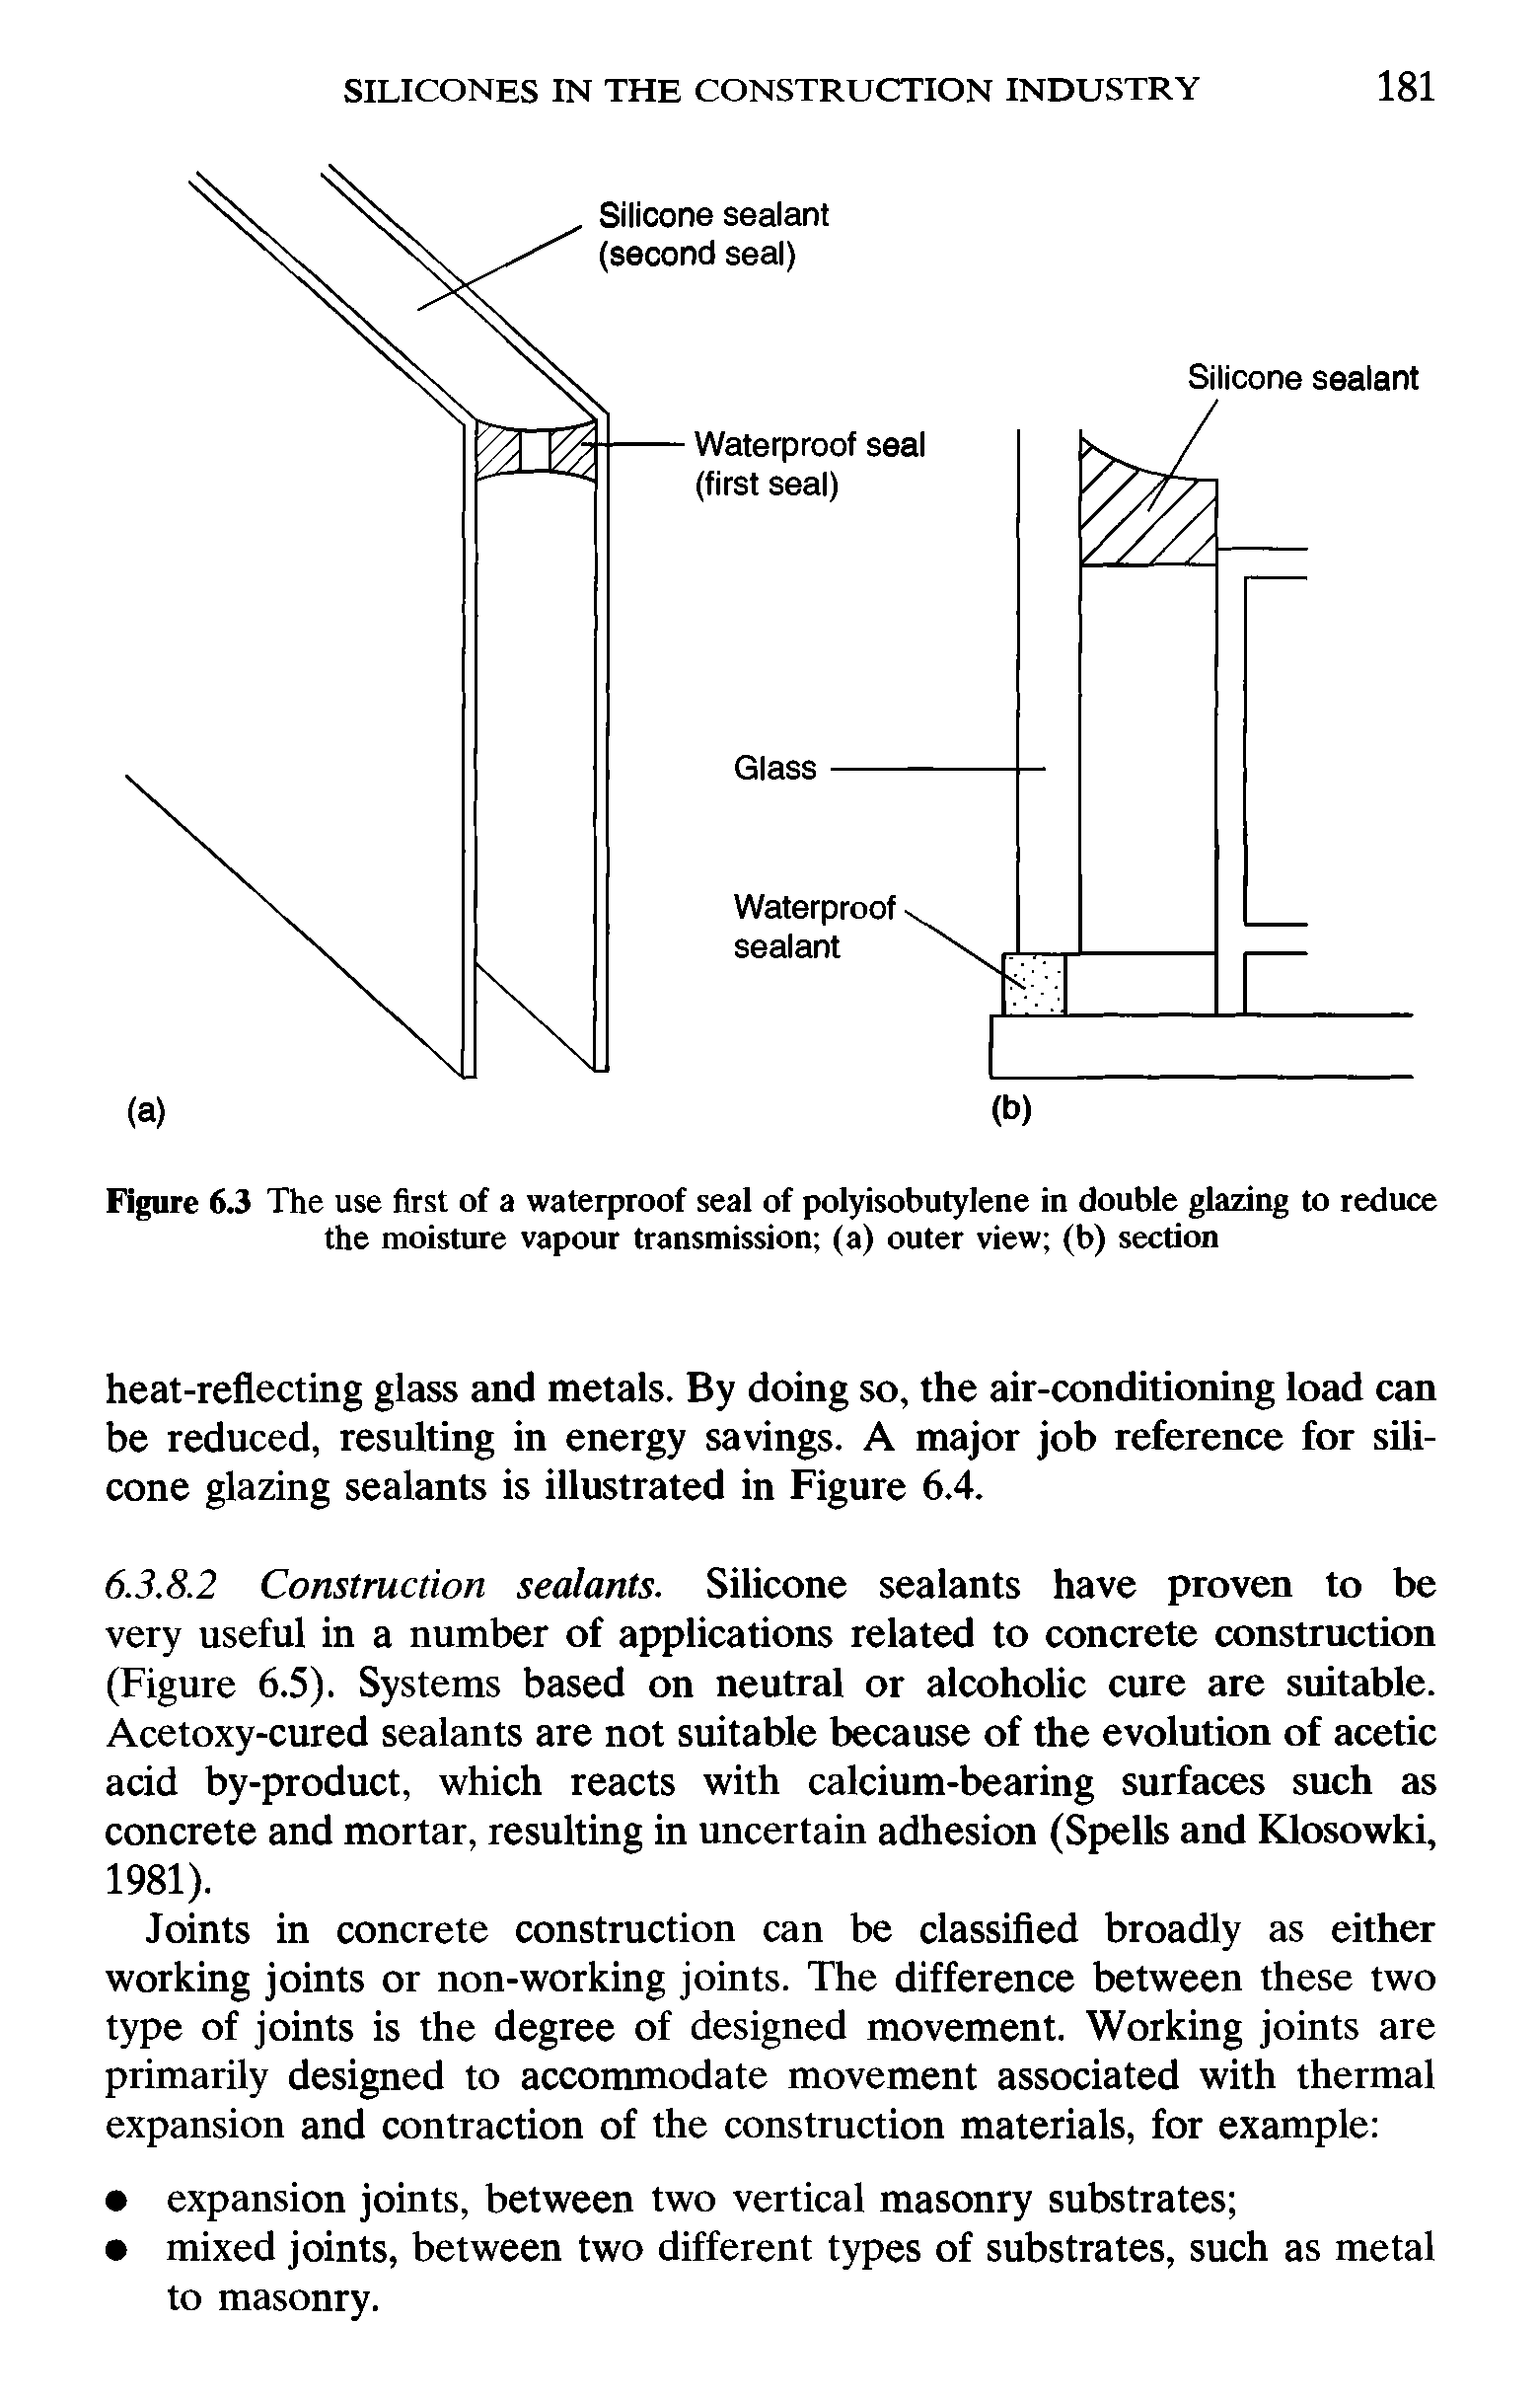 Figure 6.3 The use first of a waterproof seal of polyisobutylene in double glazing to reduce the moisture vapour transmission (a) outer view (b) section...